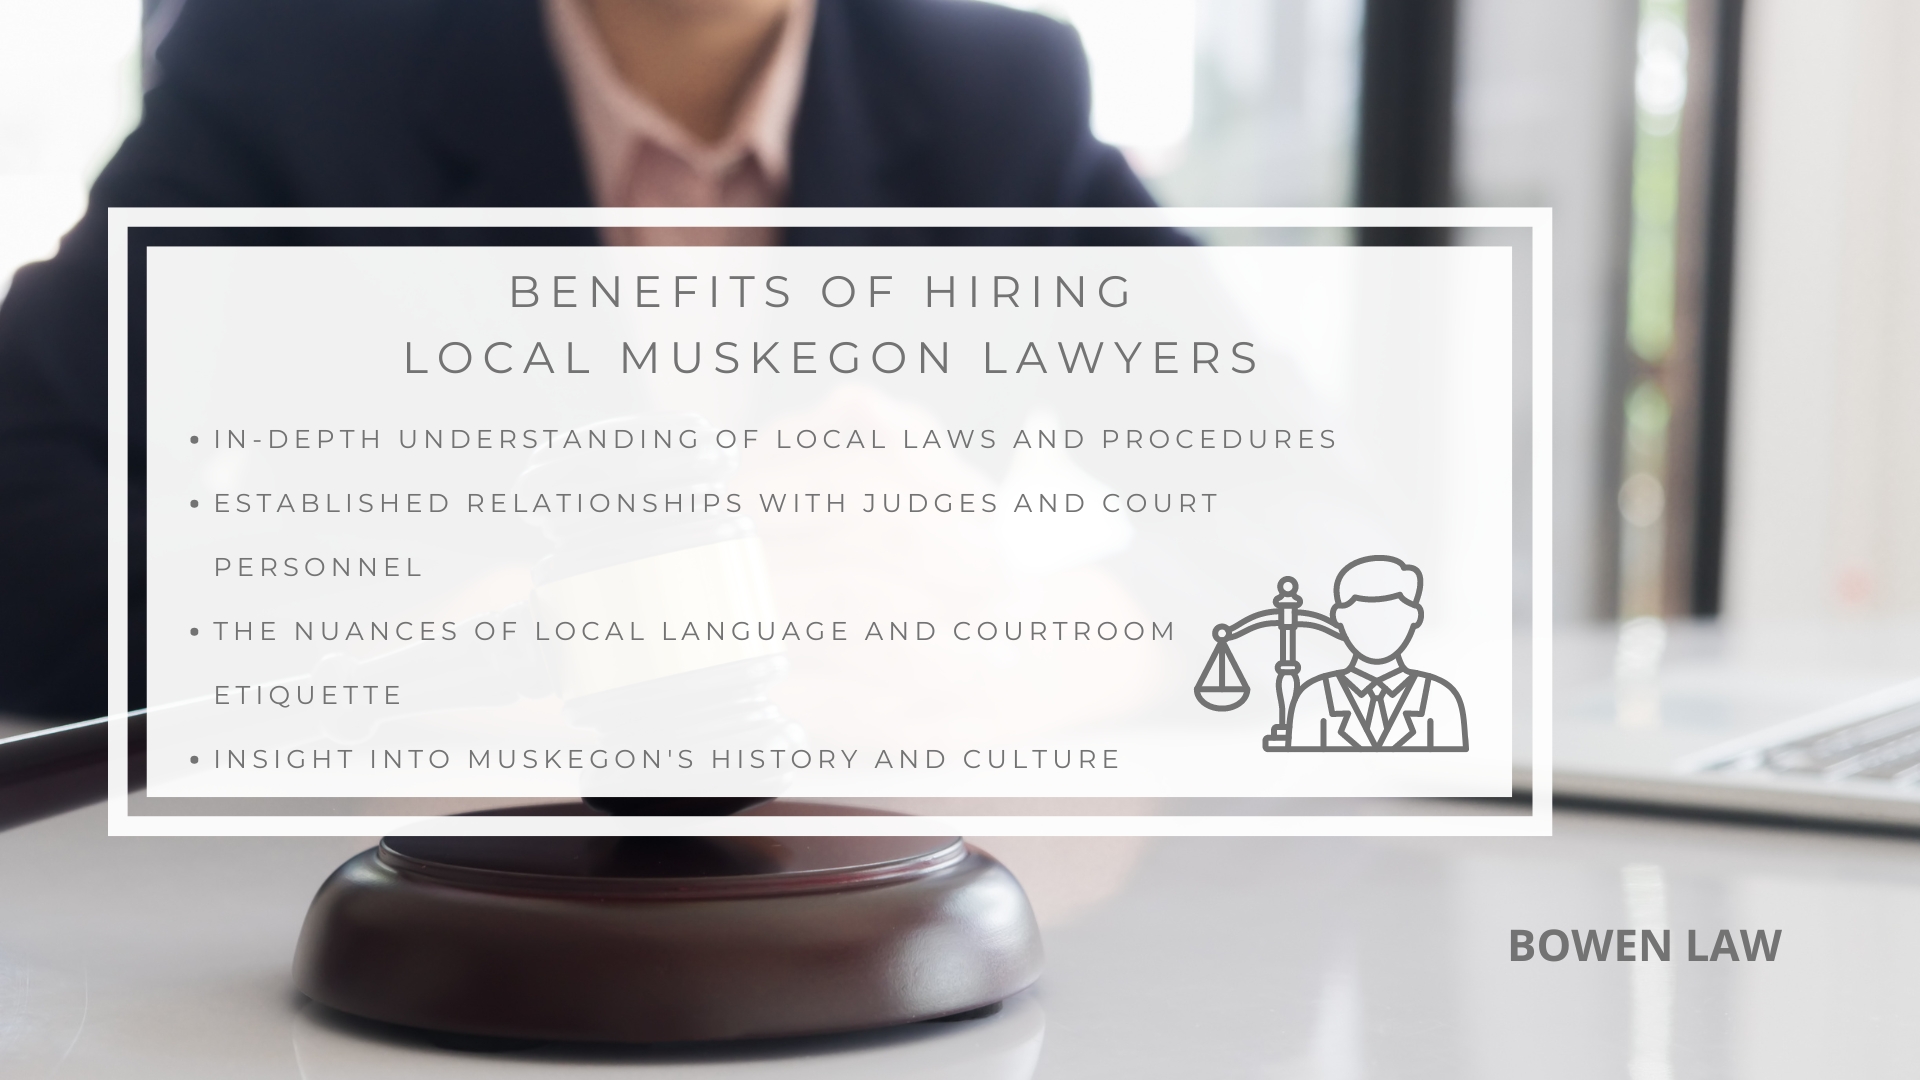 Infographic image of benefits of hiring local muskegon lawyers